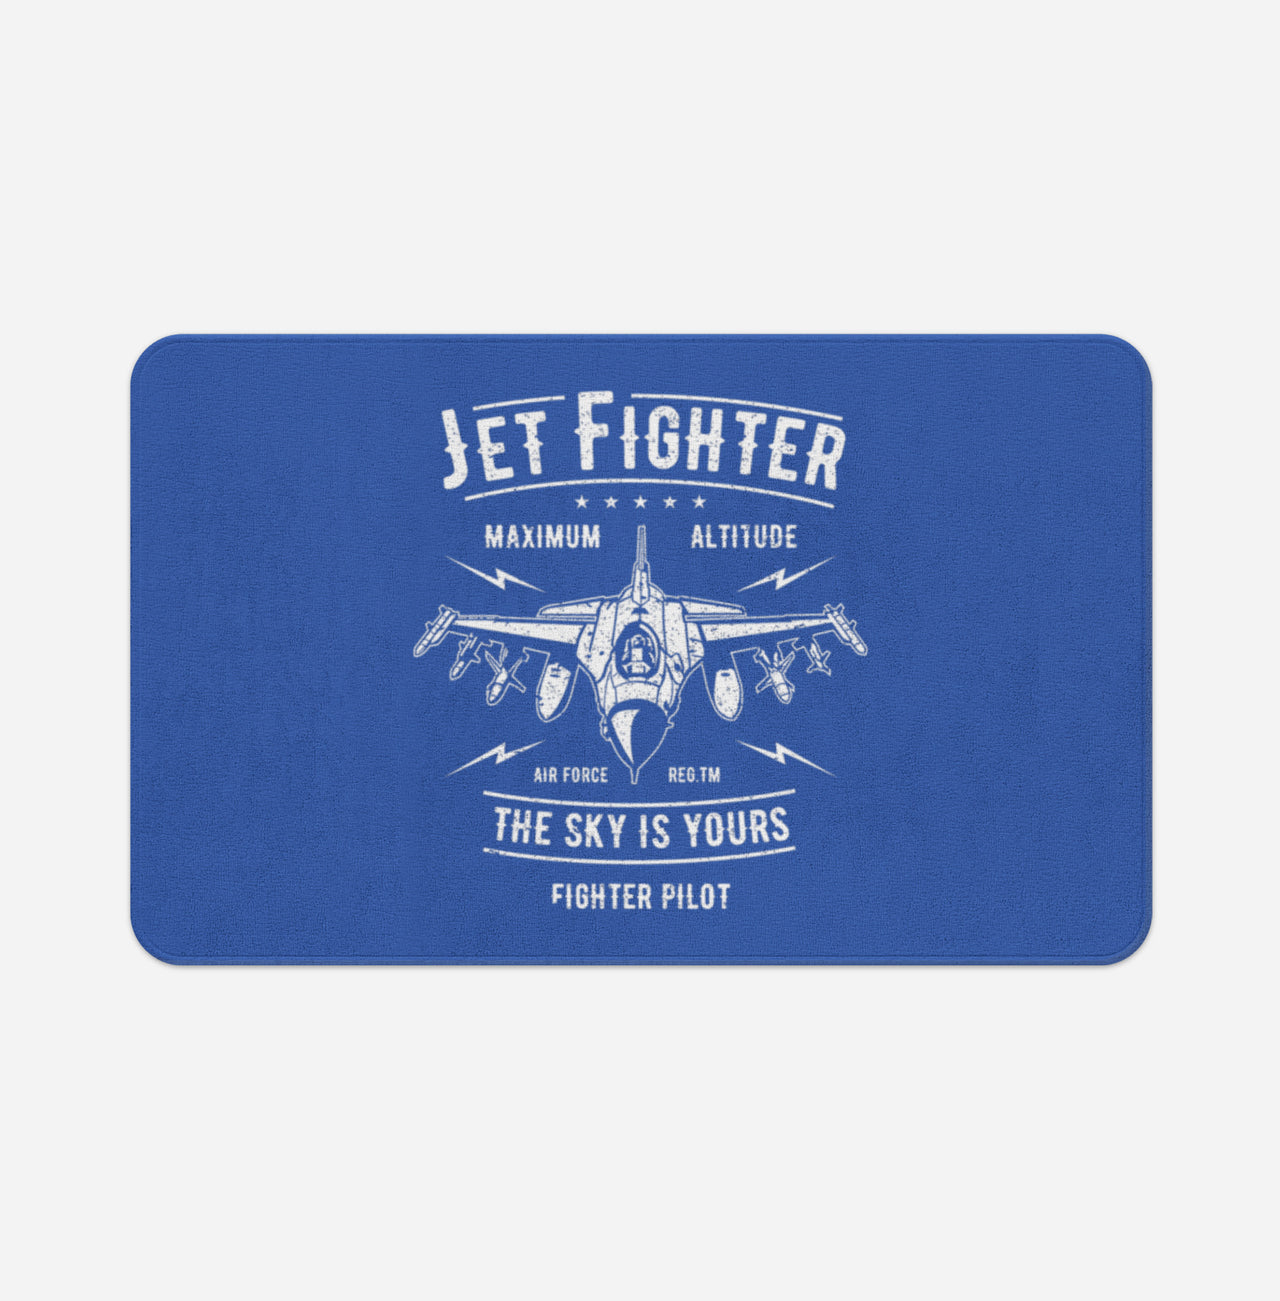 Jet Fighter - The Sky is Yours Designed Bath Mats